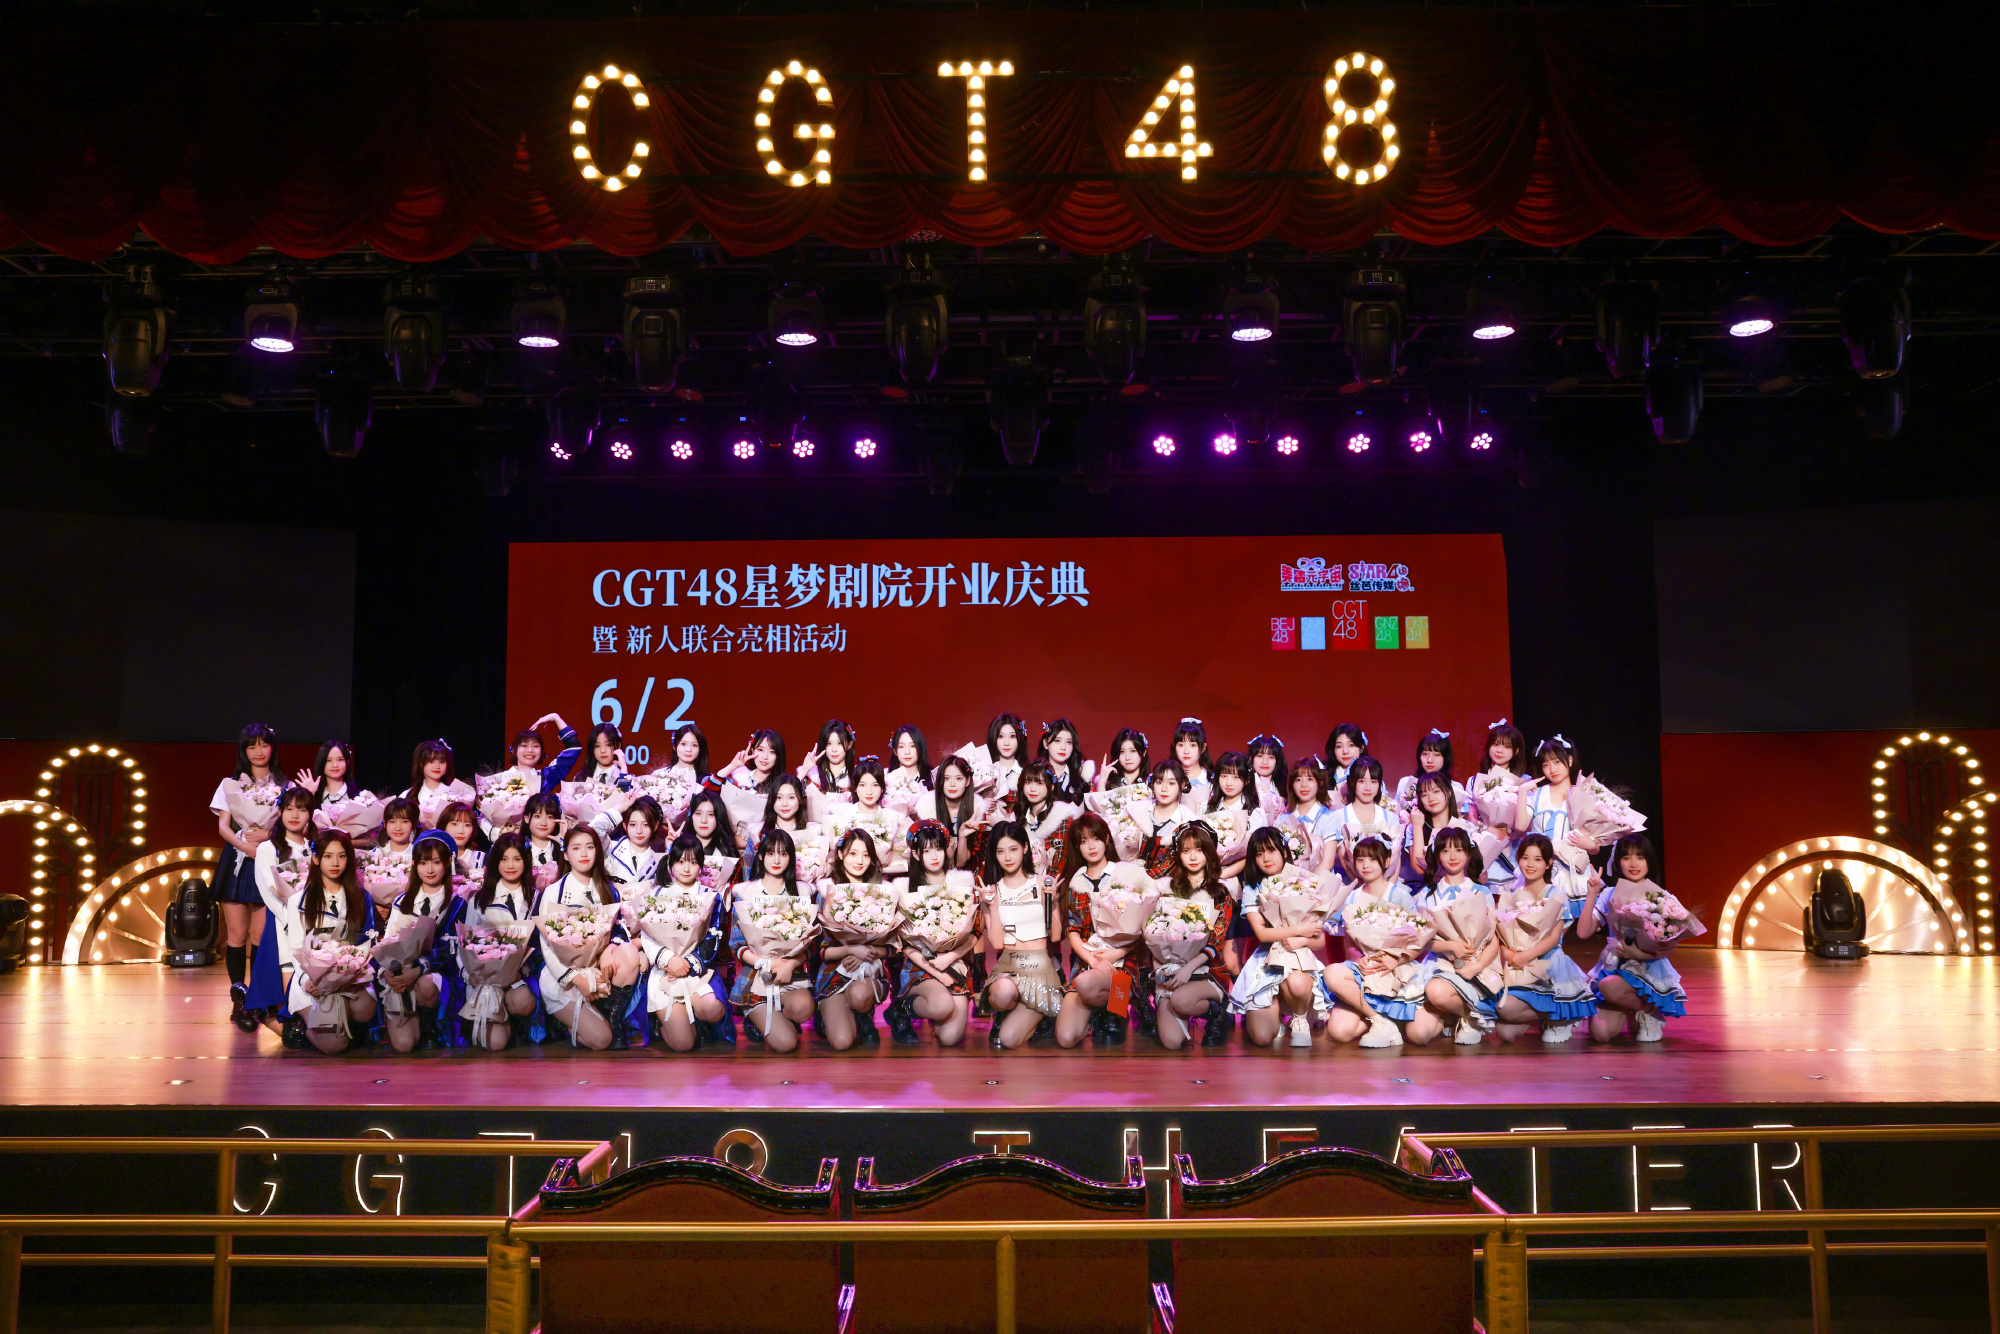 CGT48 Theater Opening Ceremony